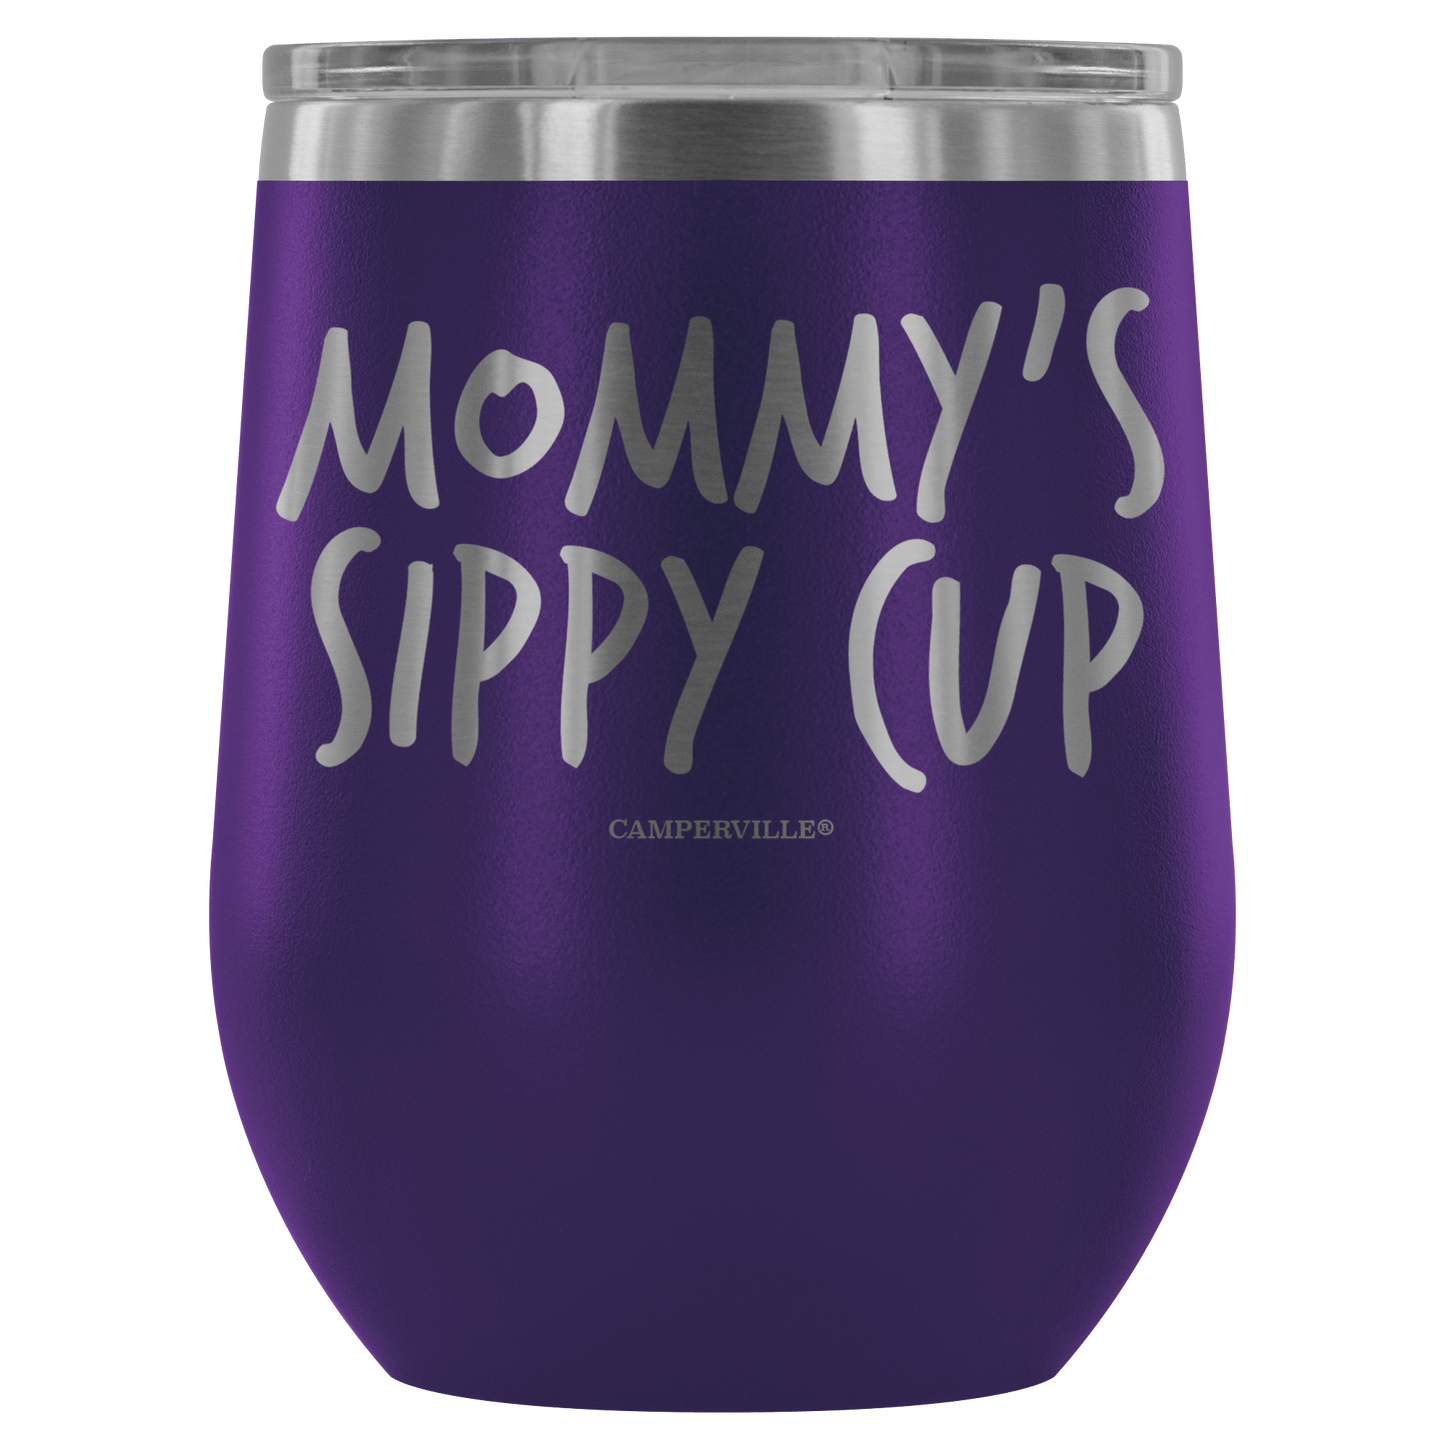 "Mommy's Sippy Cup" - Stemless Wine Cup